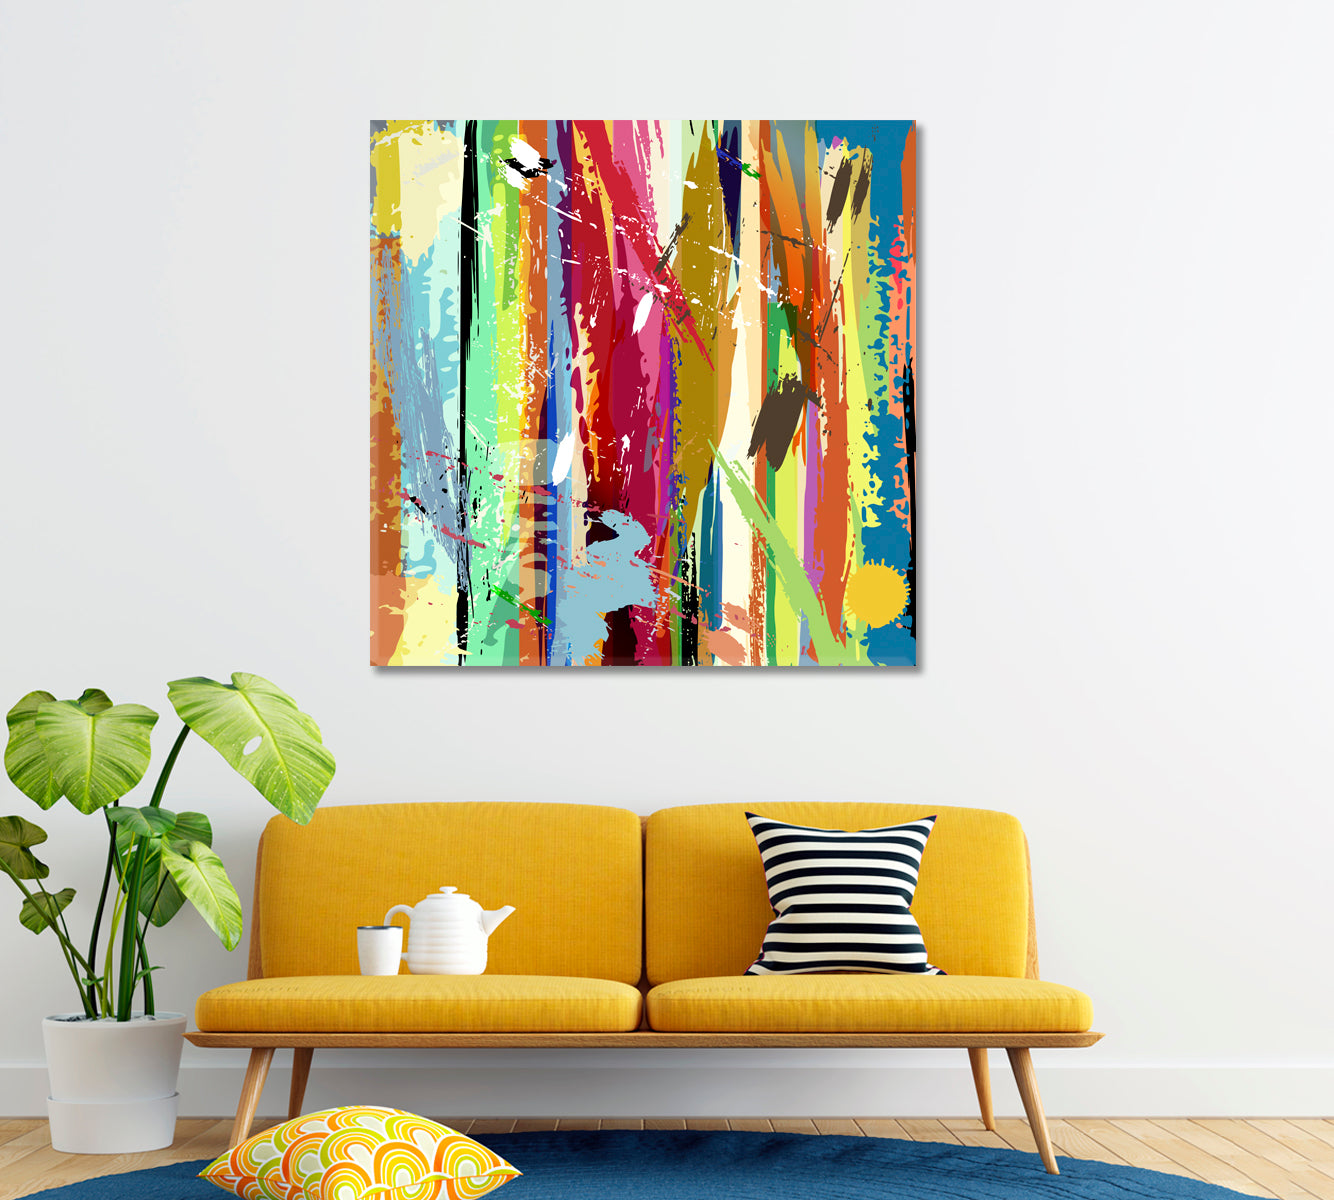 Abstract Colorful Pattern Canvas Print ArtLexy 1 Panel 12"x12" inches 